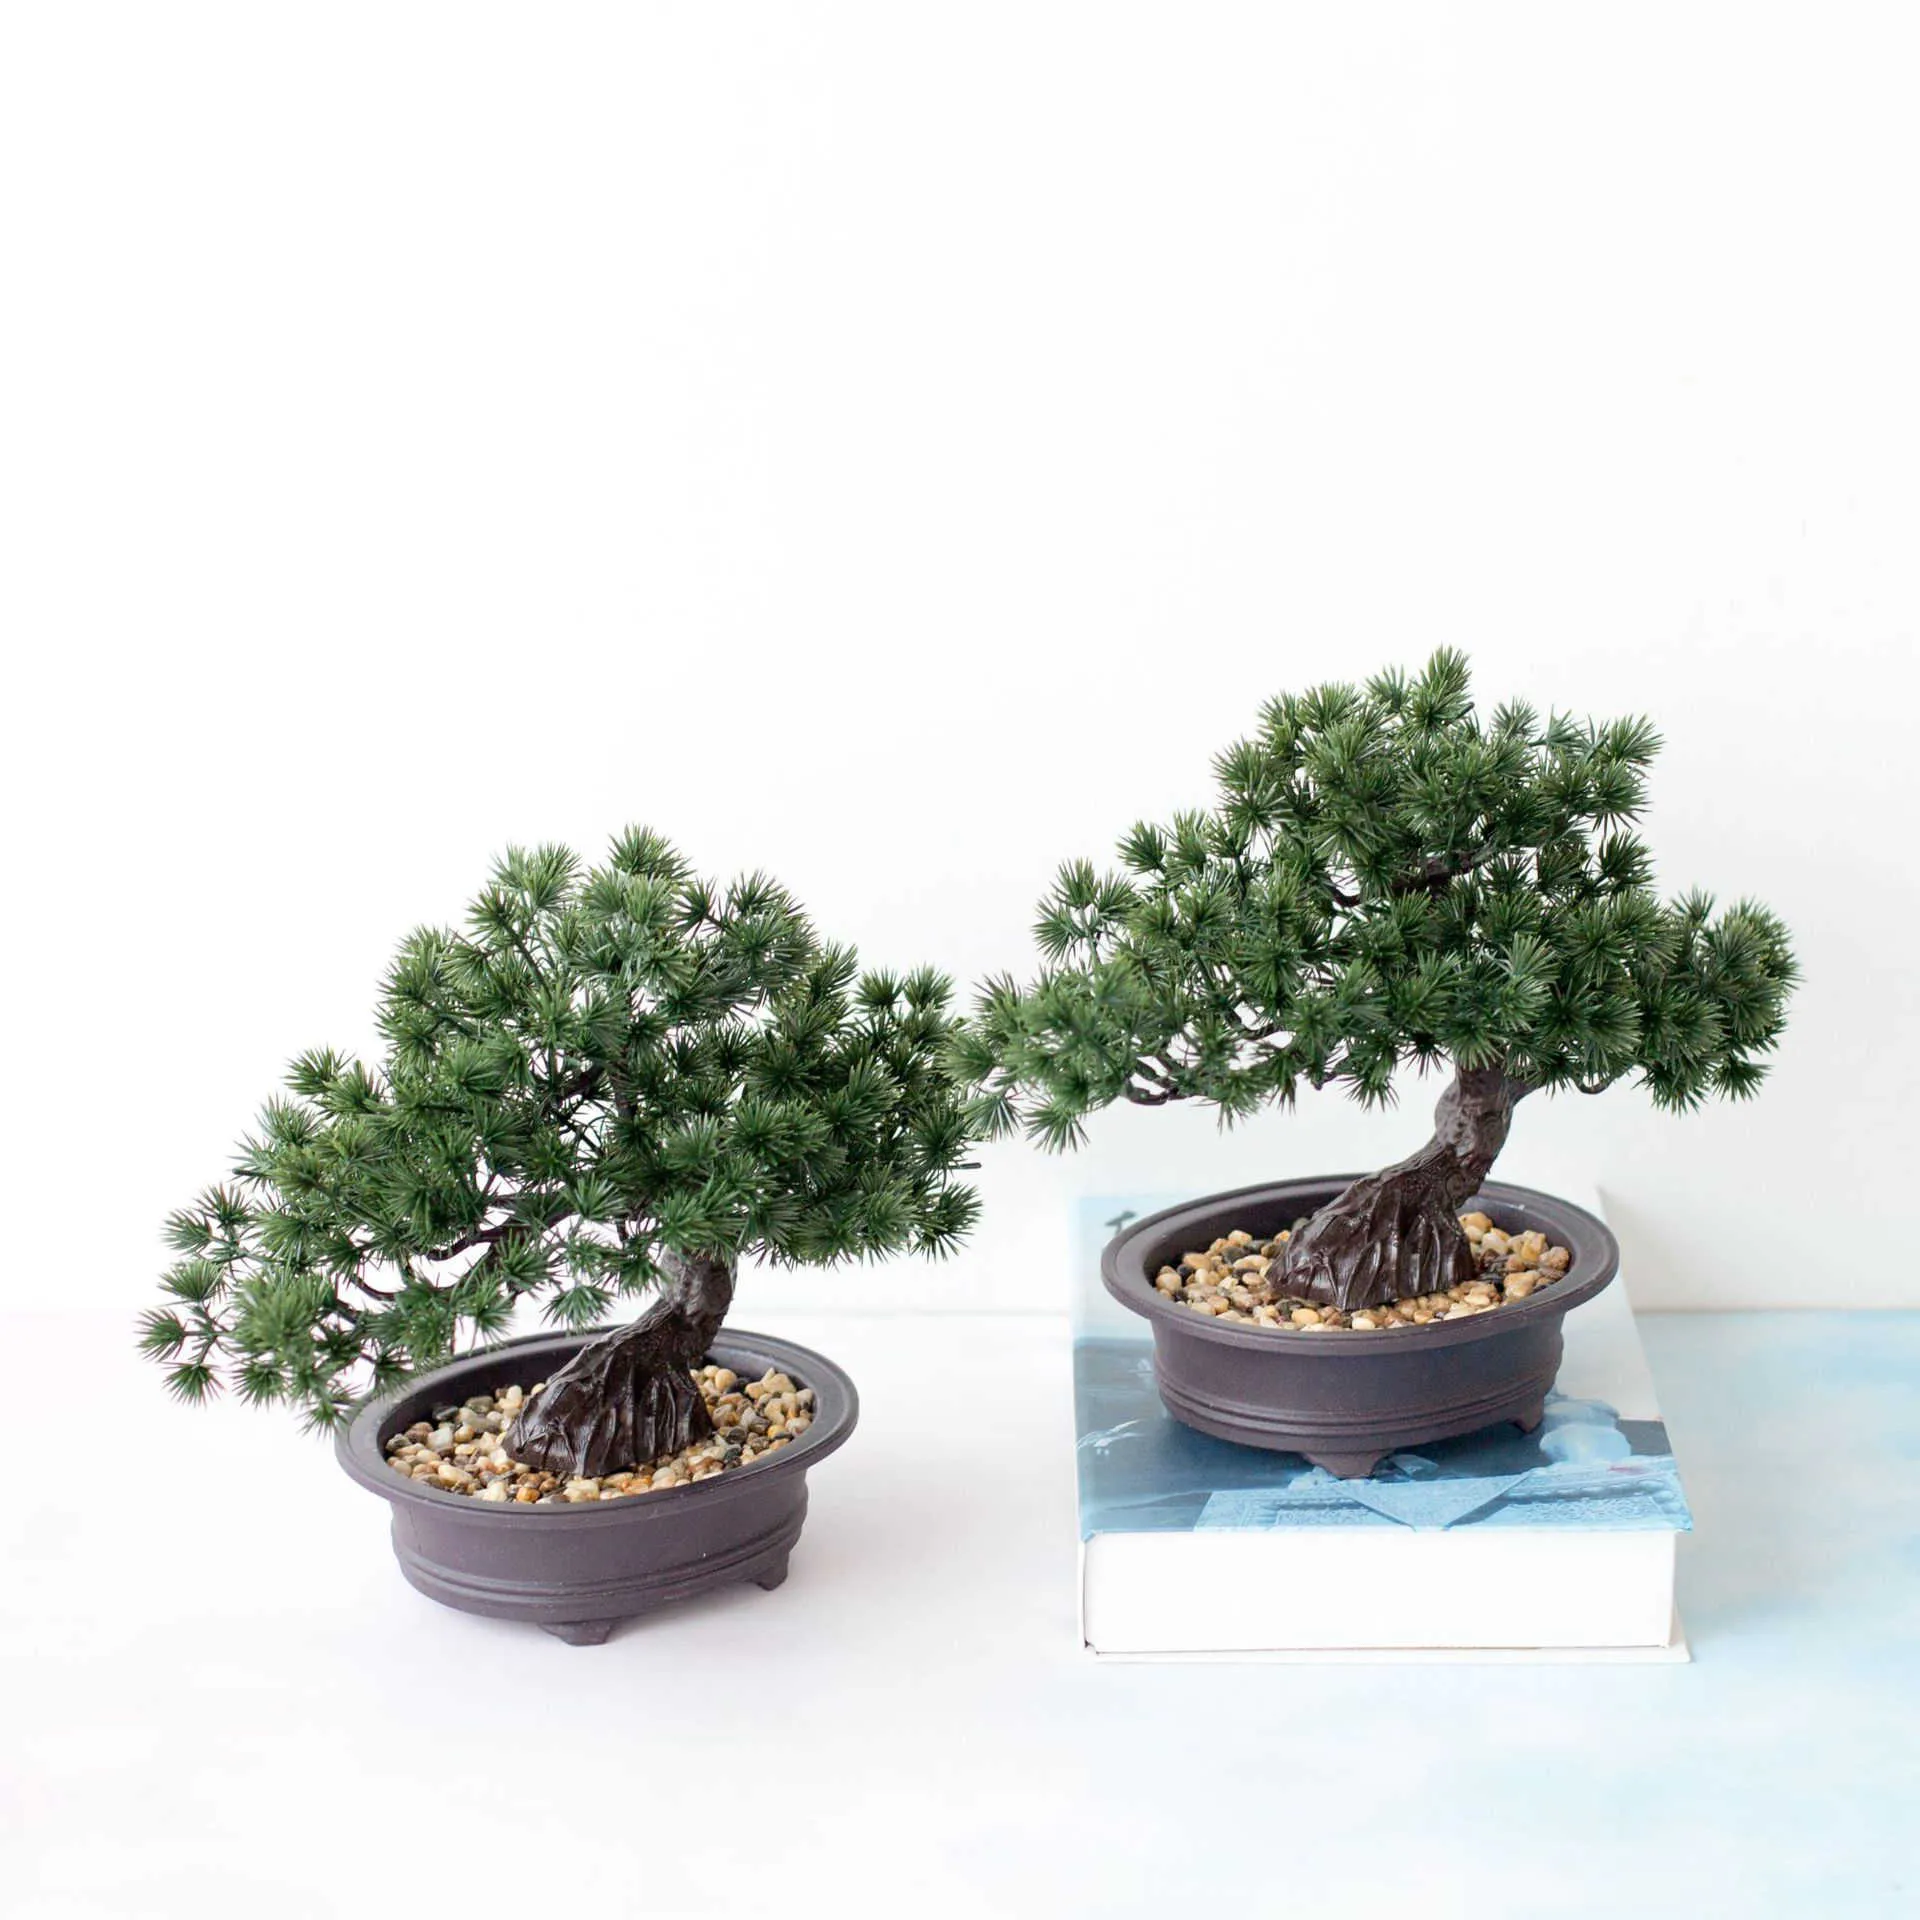 Premium Artificial Bonsai Tree With Pine Needles Ideal For Garden, Branch  Desk, And Home Decor From Cong09, $12.81